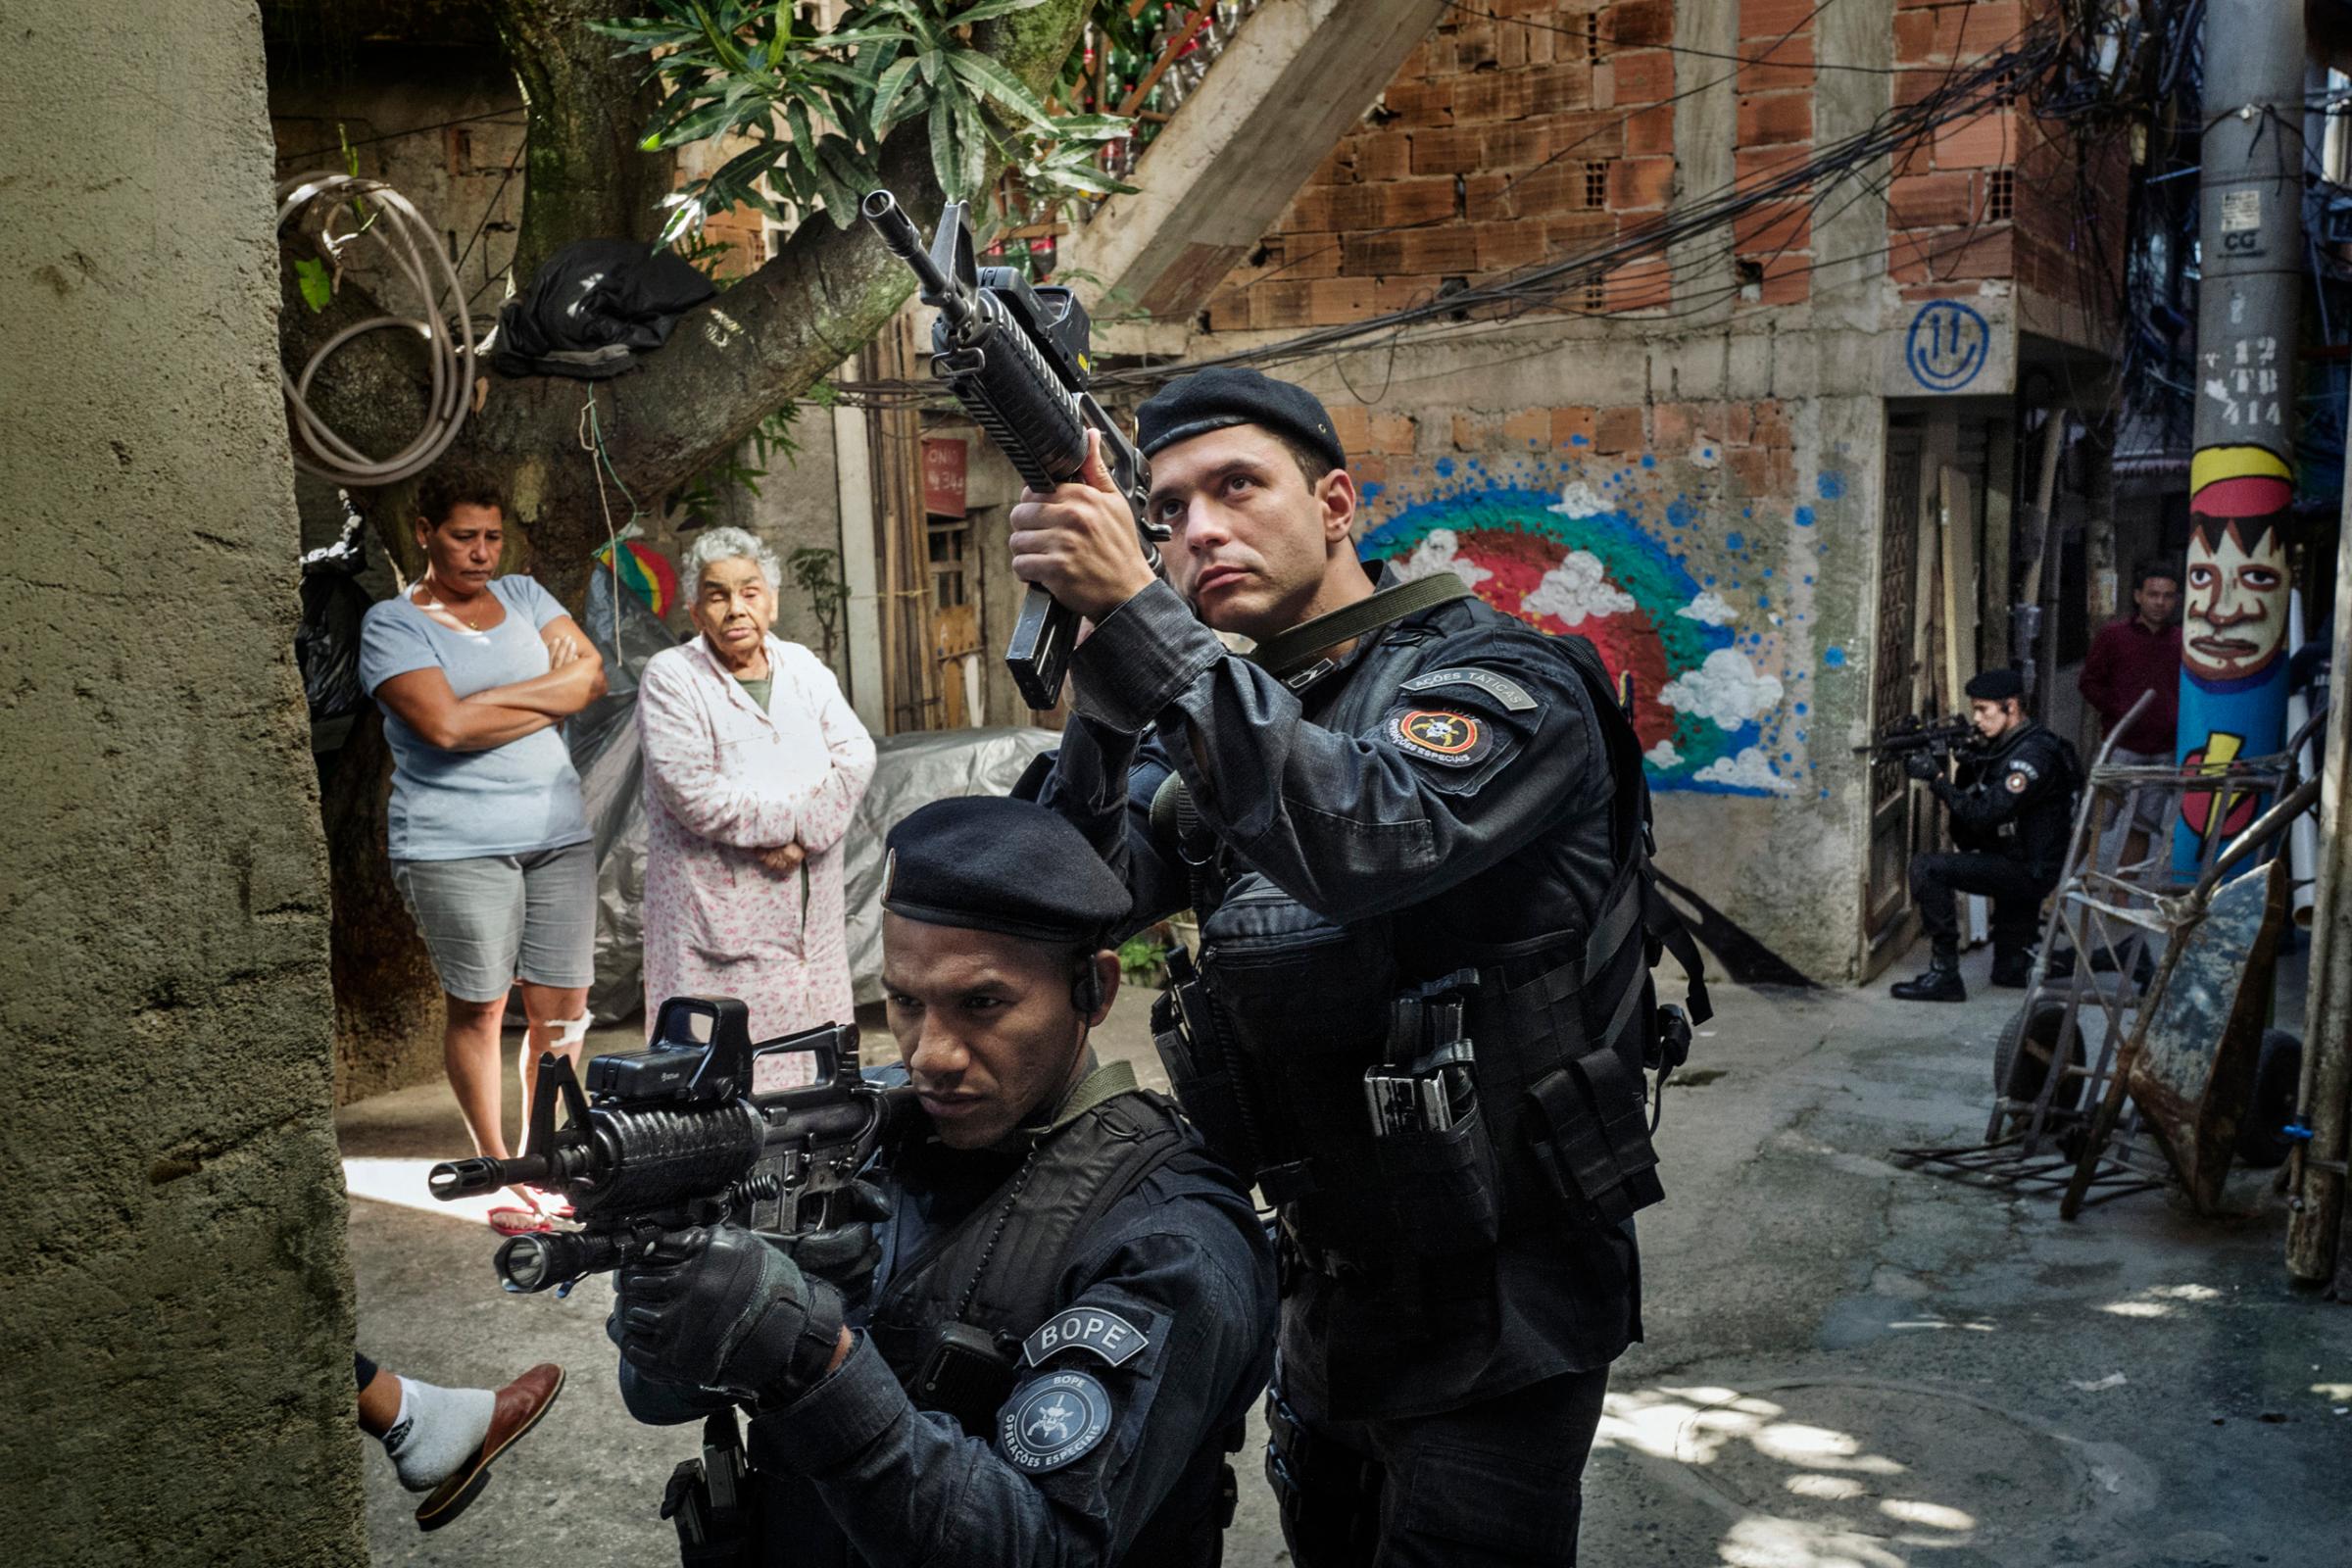 Members of the BOPE (Battalion of Special Police Operations) during an  exercise in a densely populated urban area in the Tavares favela in Rio de Janeiro.